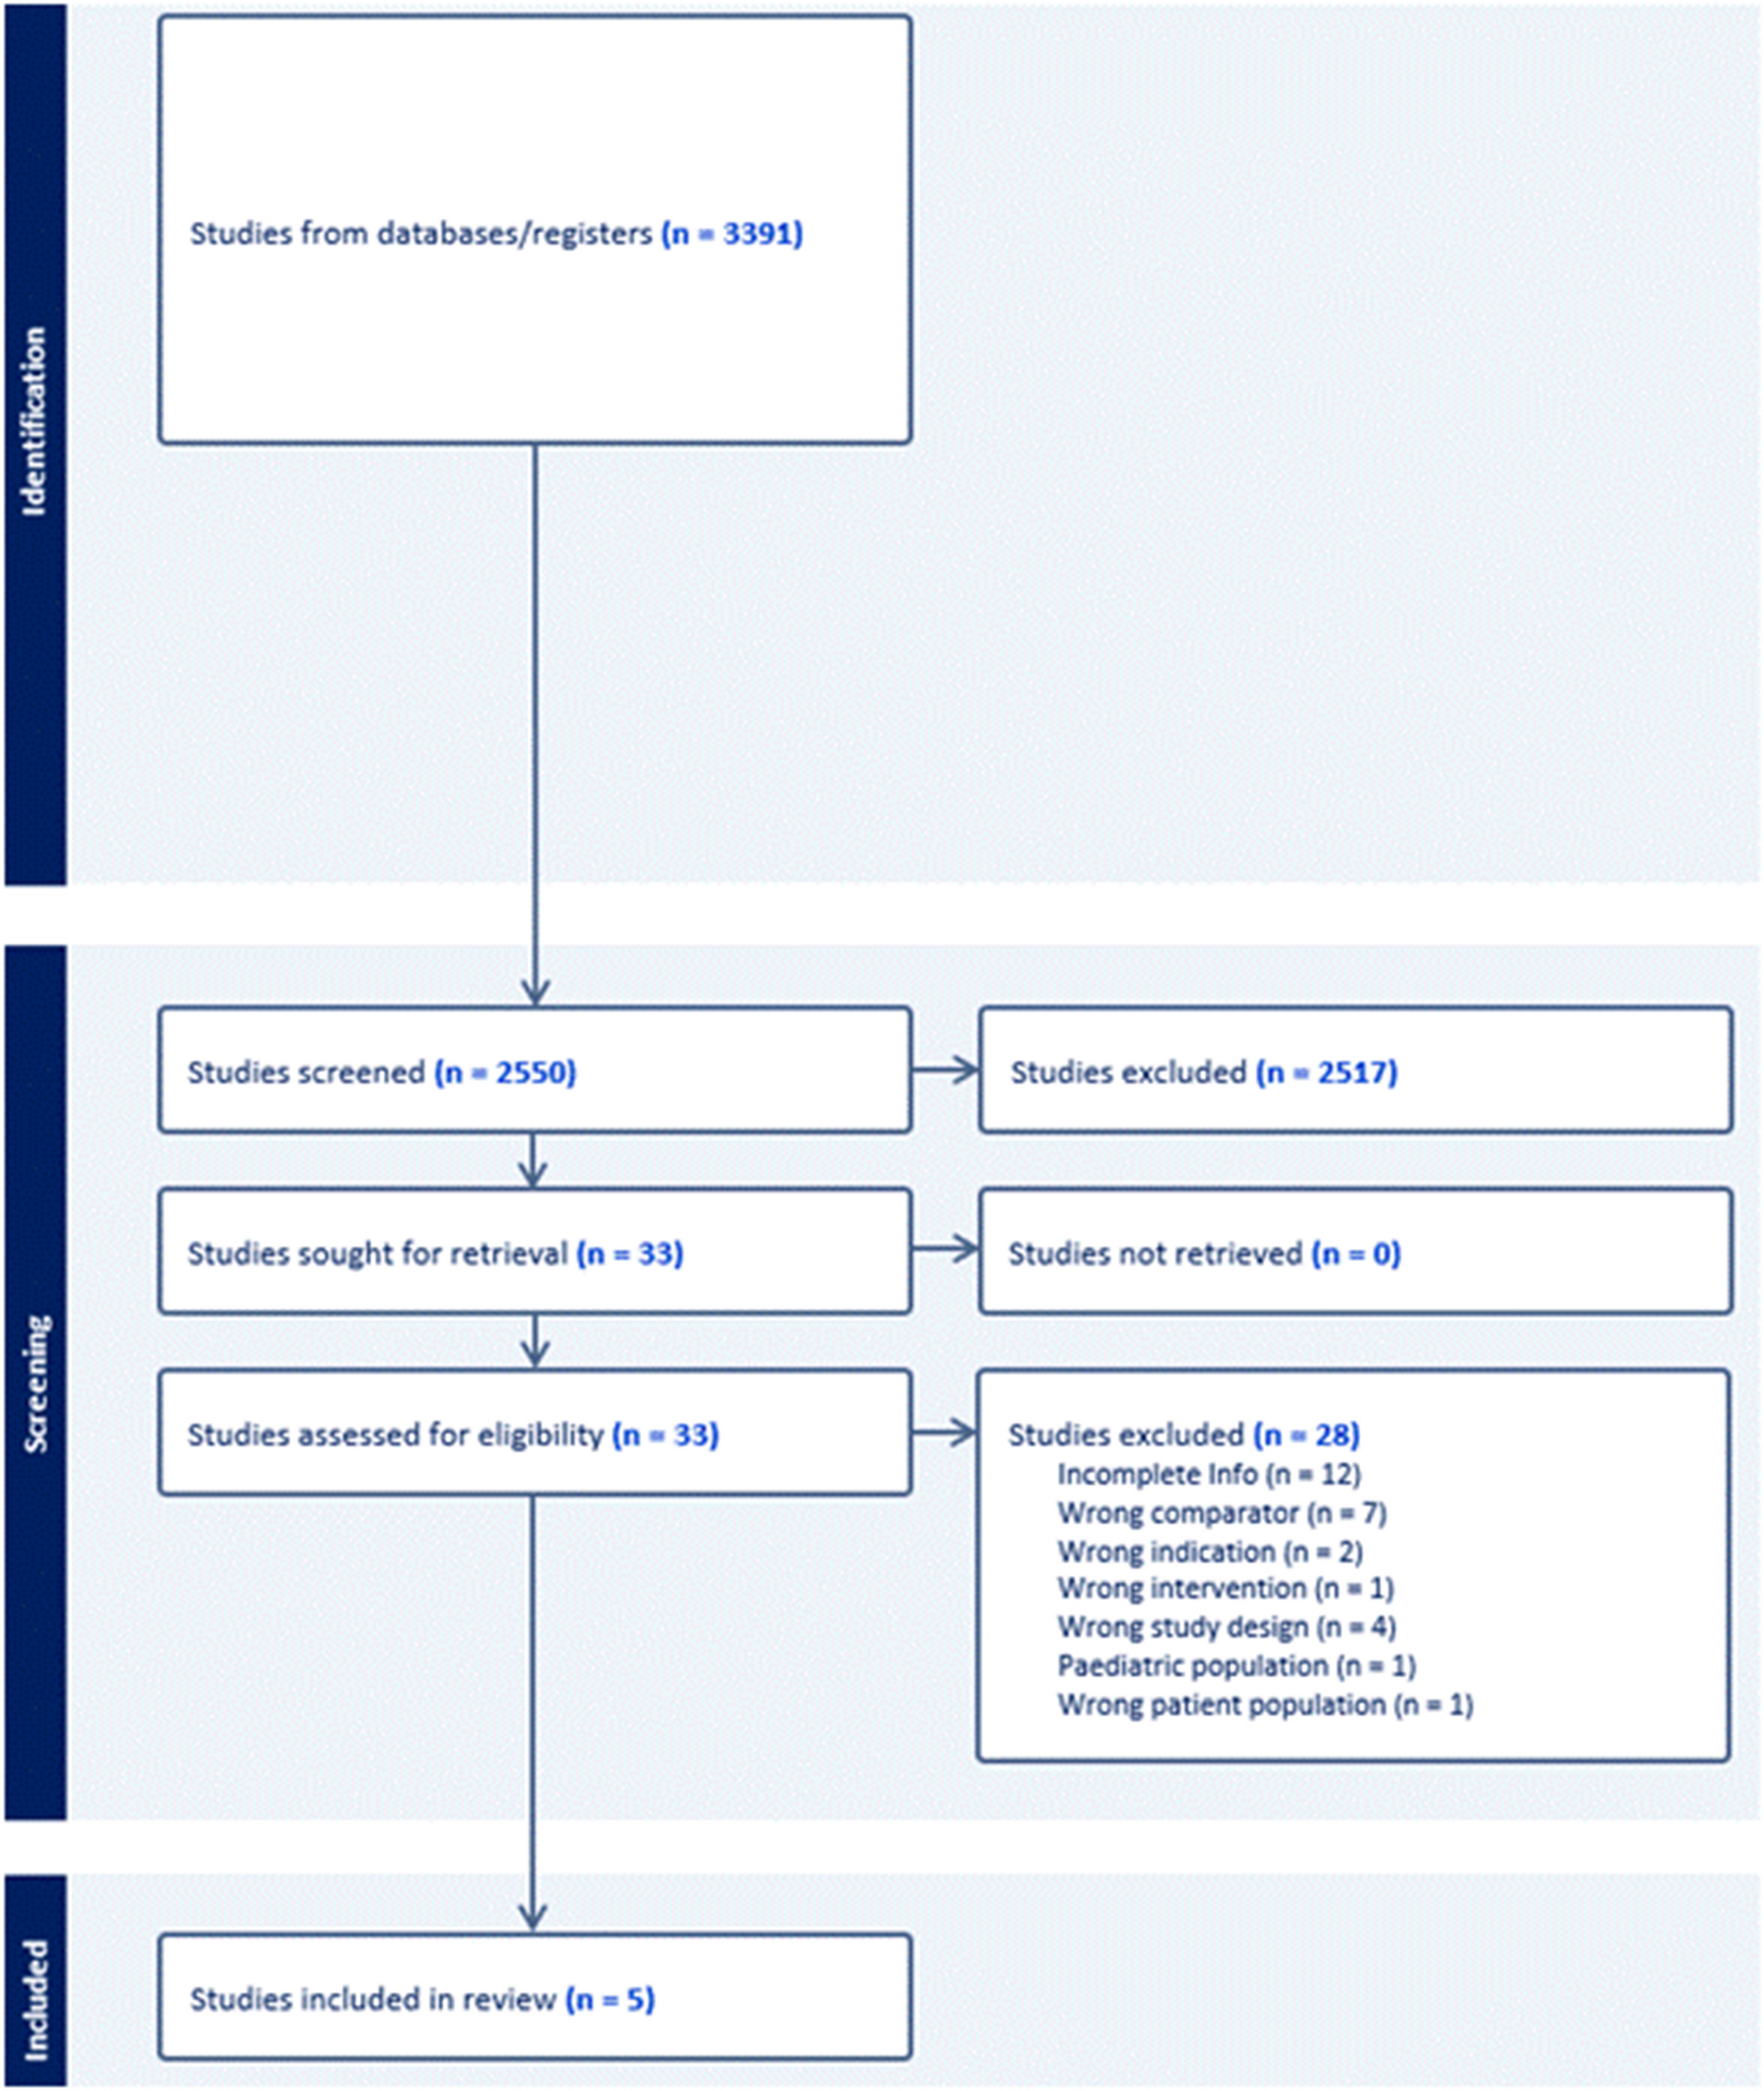 Endoscopic incisional therapy for benign anastomotic strictures after esophagectomy or gastrectomy: a systematic review and meta-analysis